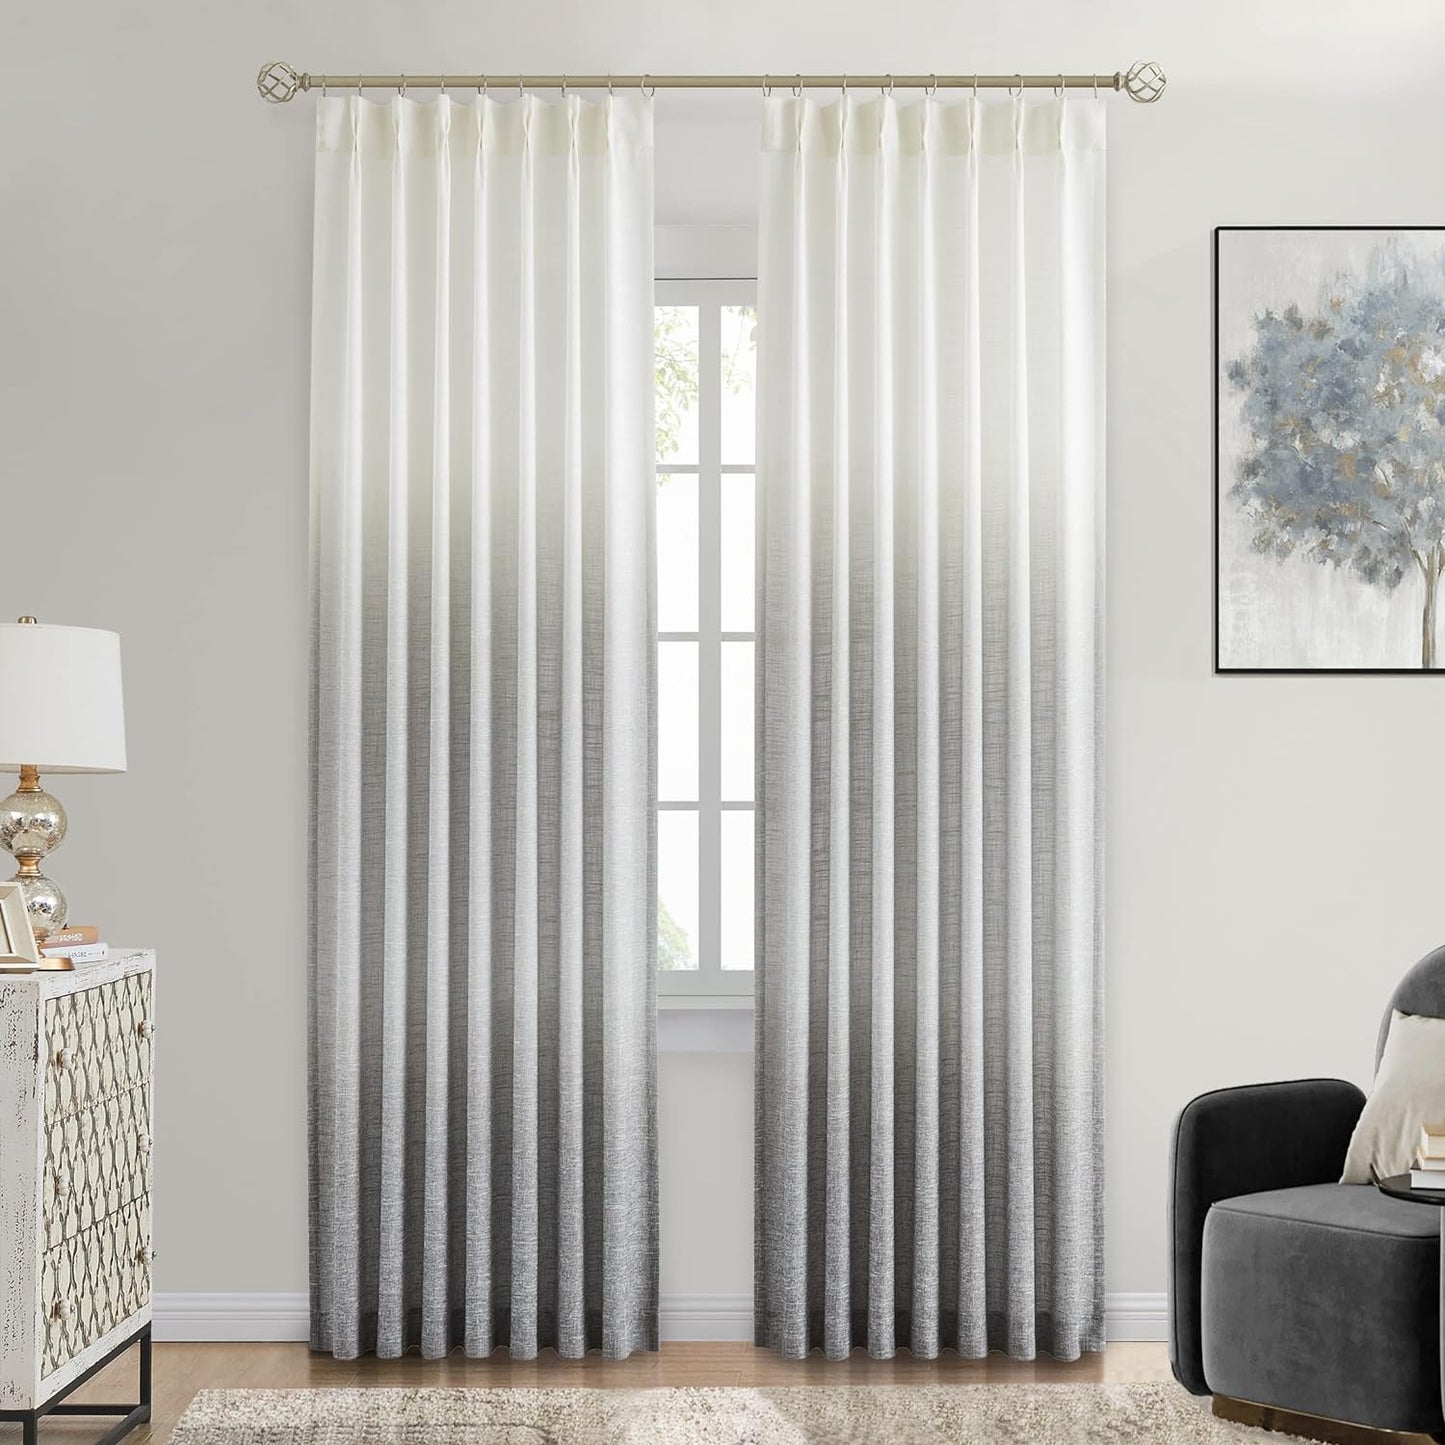 Central Park Ombre Pinch Pleat Curtain Panels Rayon Blend Textured Semi Sheer Window Treatment Drape with Backtab for Living Room Bedroom, Cream White to Indigo Blue, 40" Wx84 L, 2 Panels  Central Park Grey 40"X108"X2 